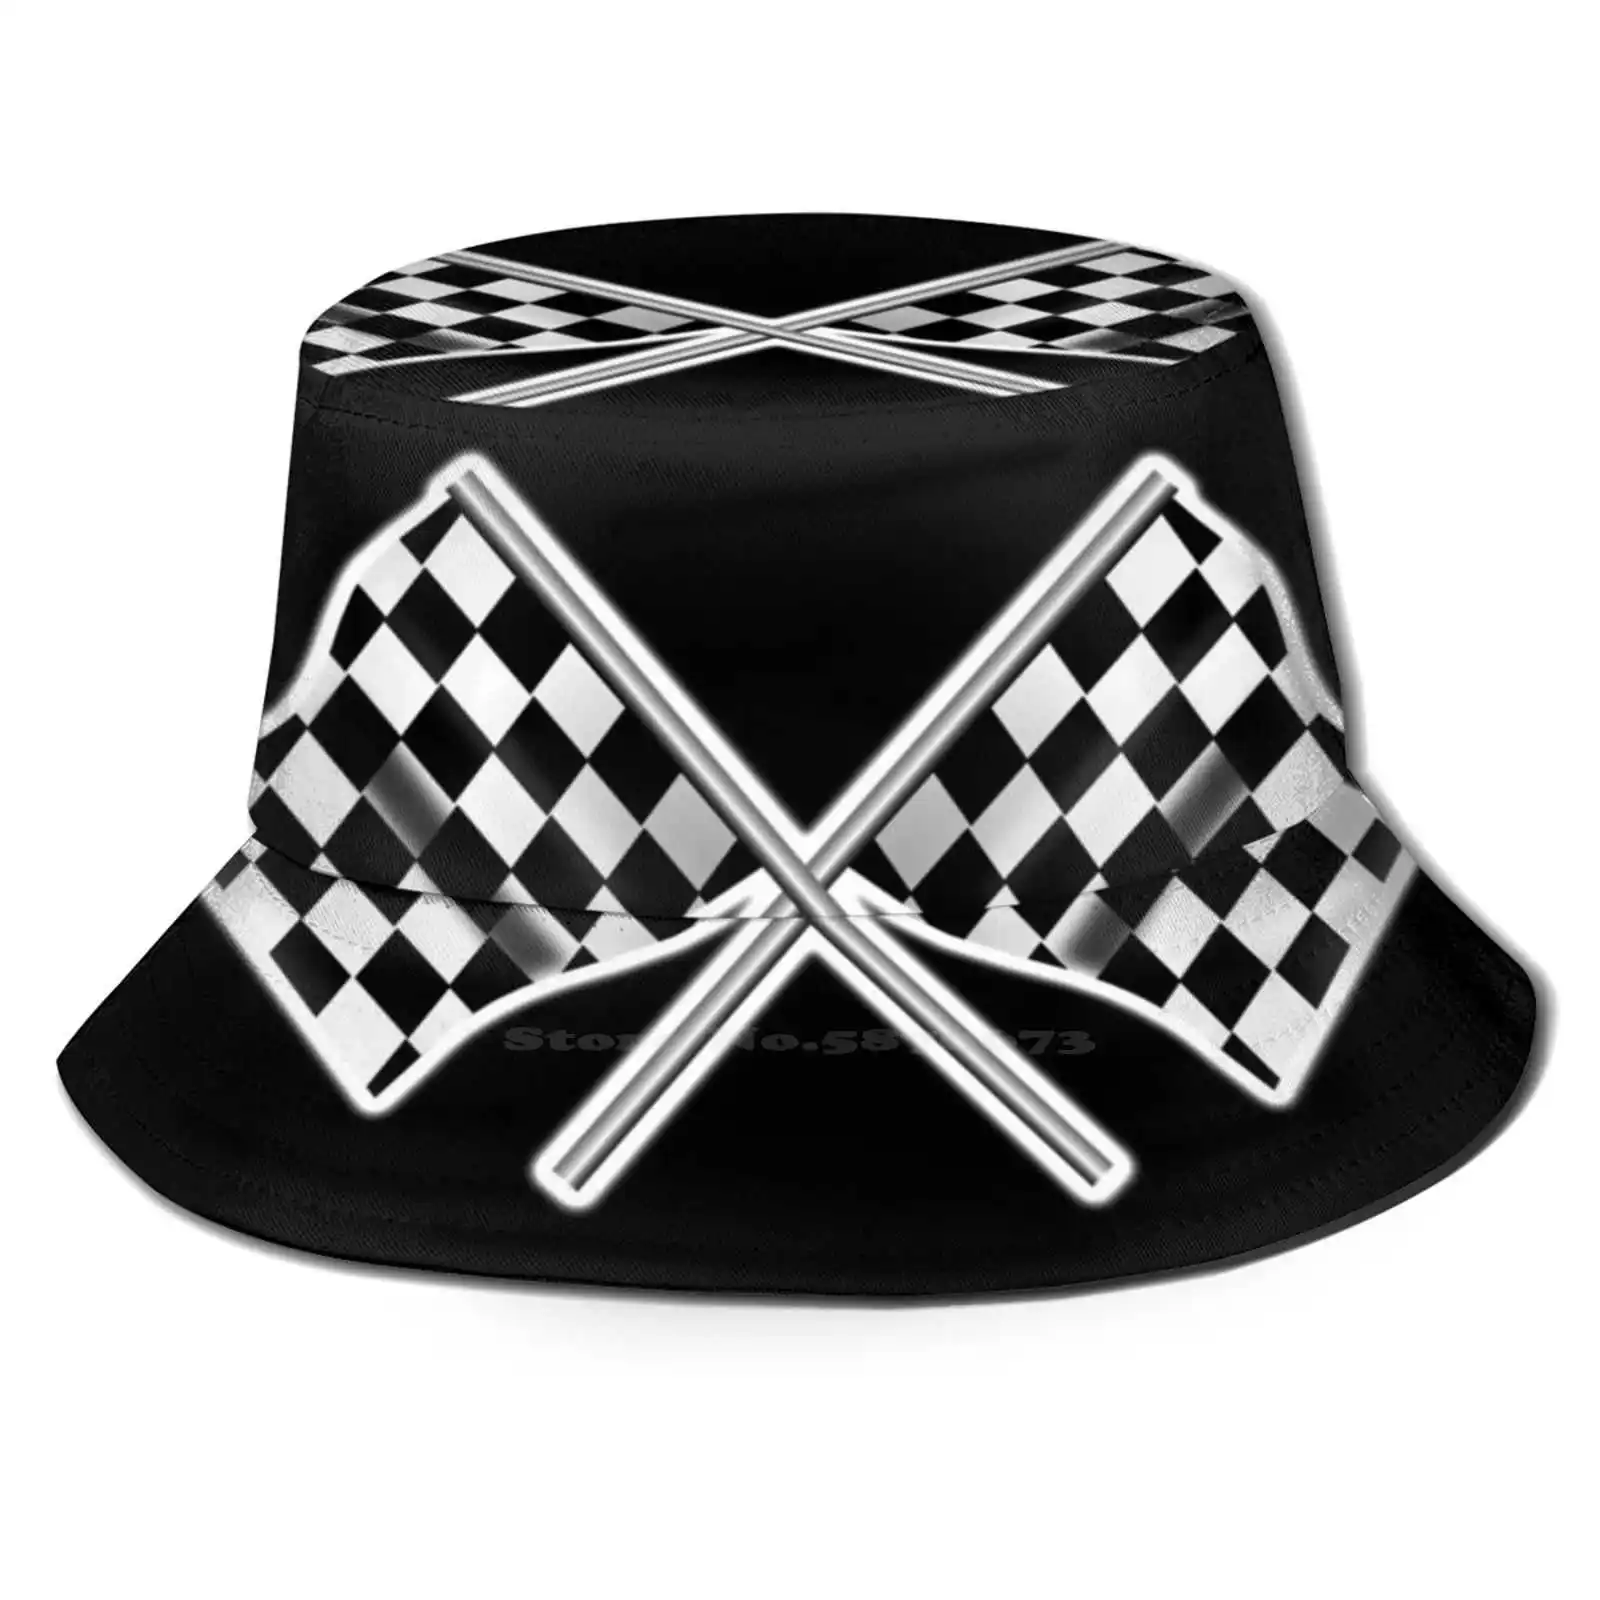 

Race Car Checkered Flag Crossed Motorsport Win Winner Chequered Flag Racing Cars Race On Black Pattern Hats Outdoor Hat Sun Cap